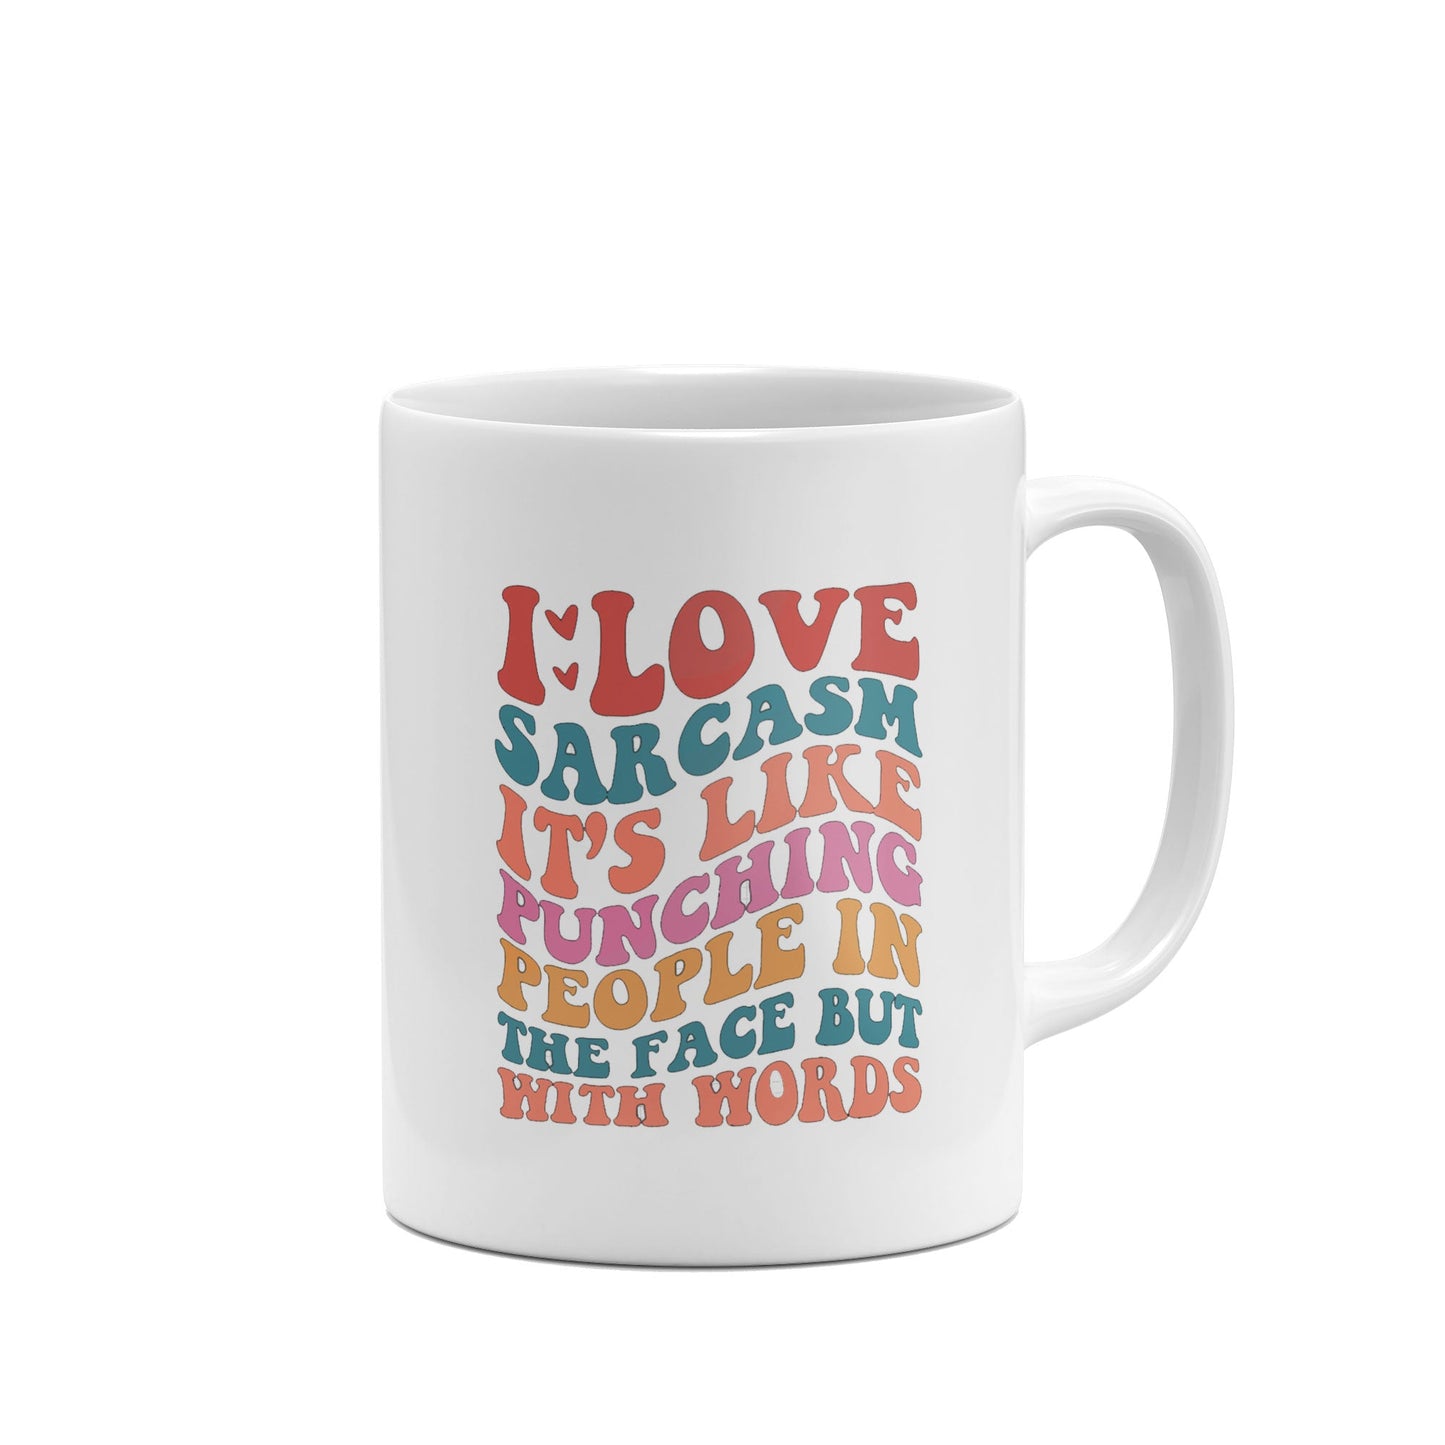 I Love Sarcasm It's Like Punching People in the Face Funny Mug-Mugs-Crimson and Clover Studio